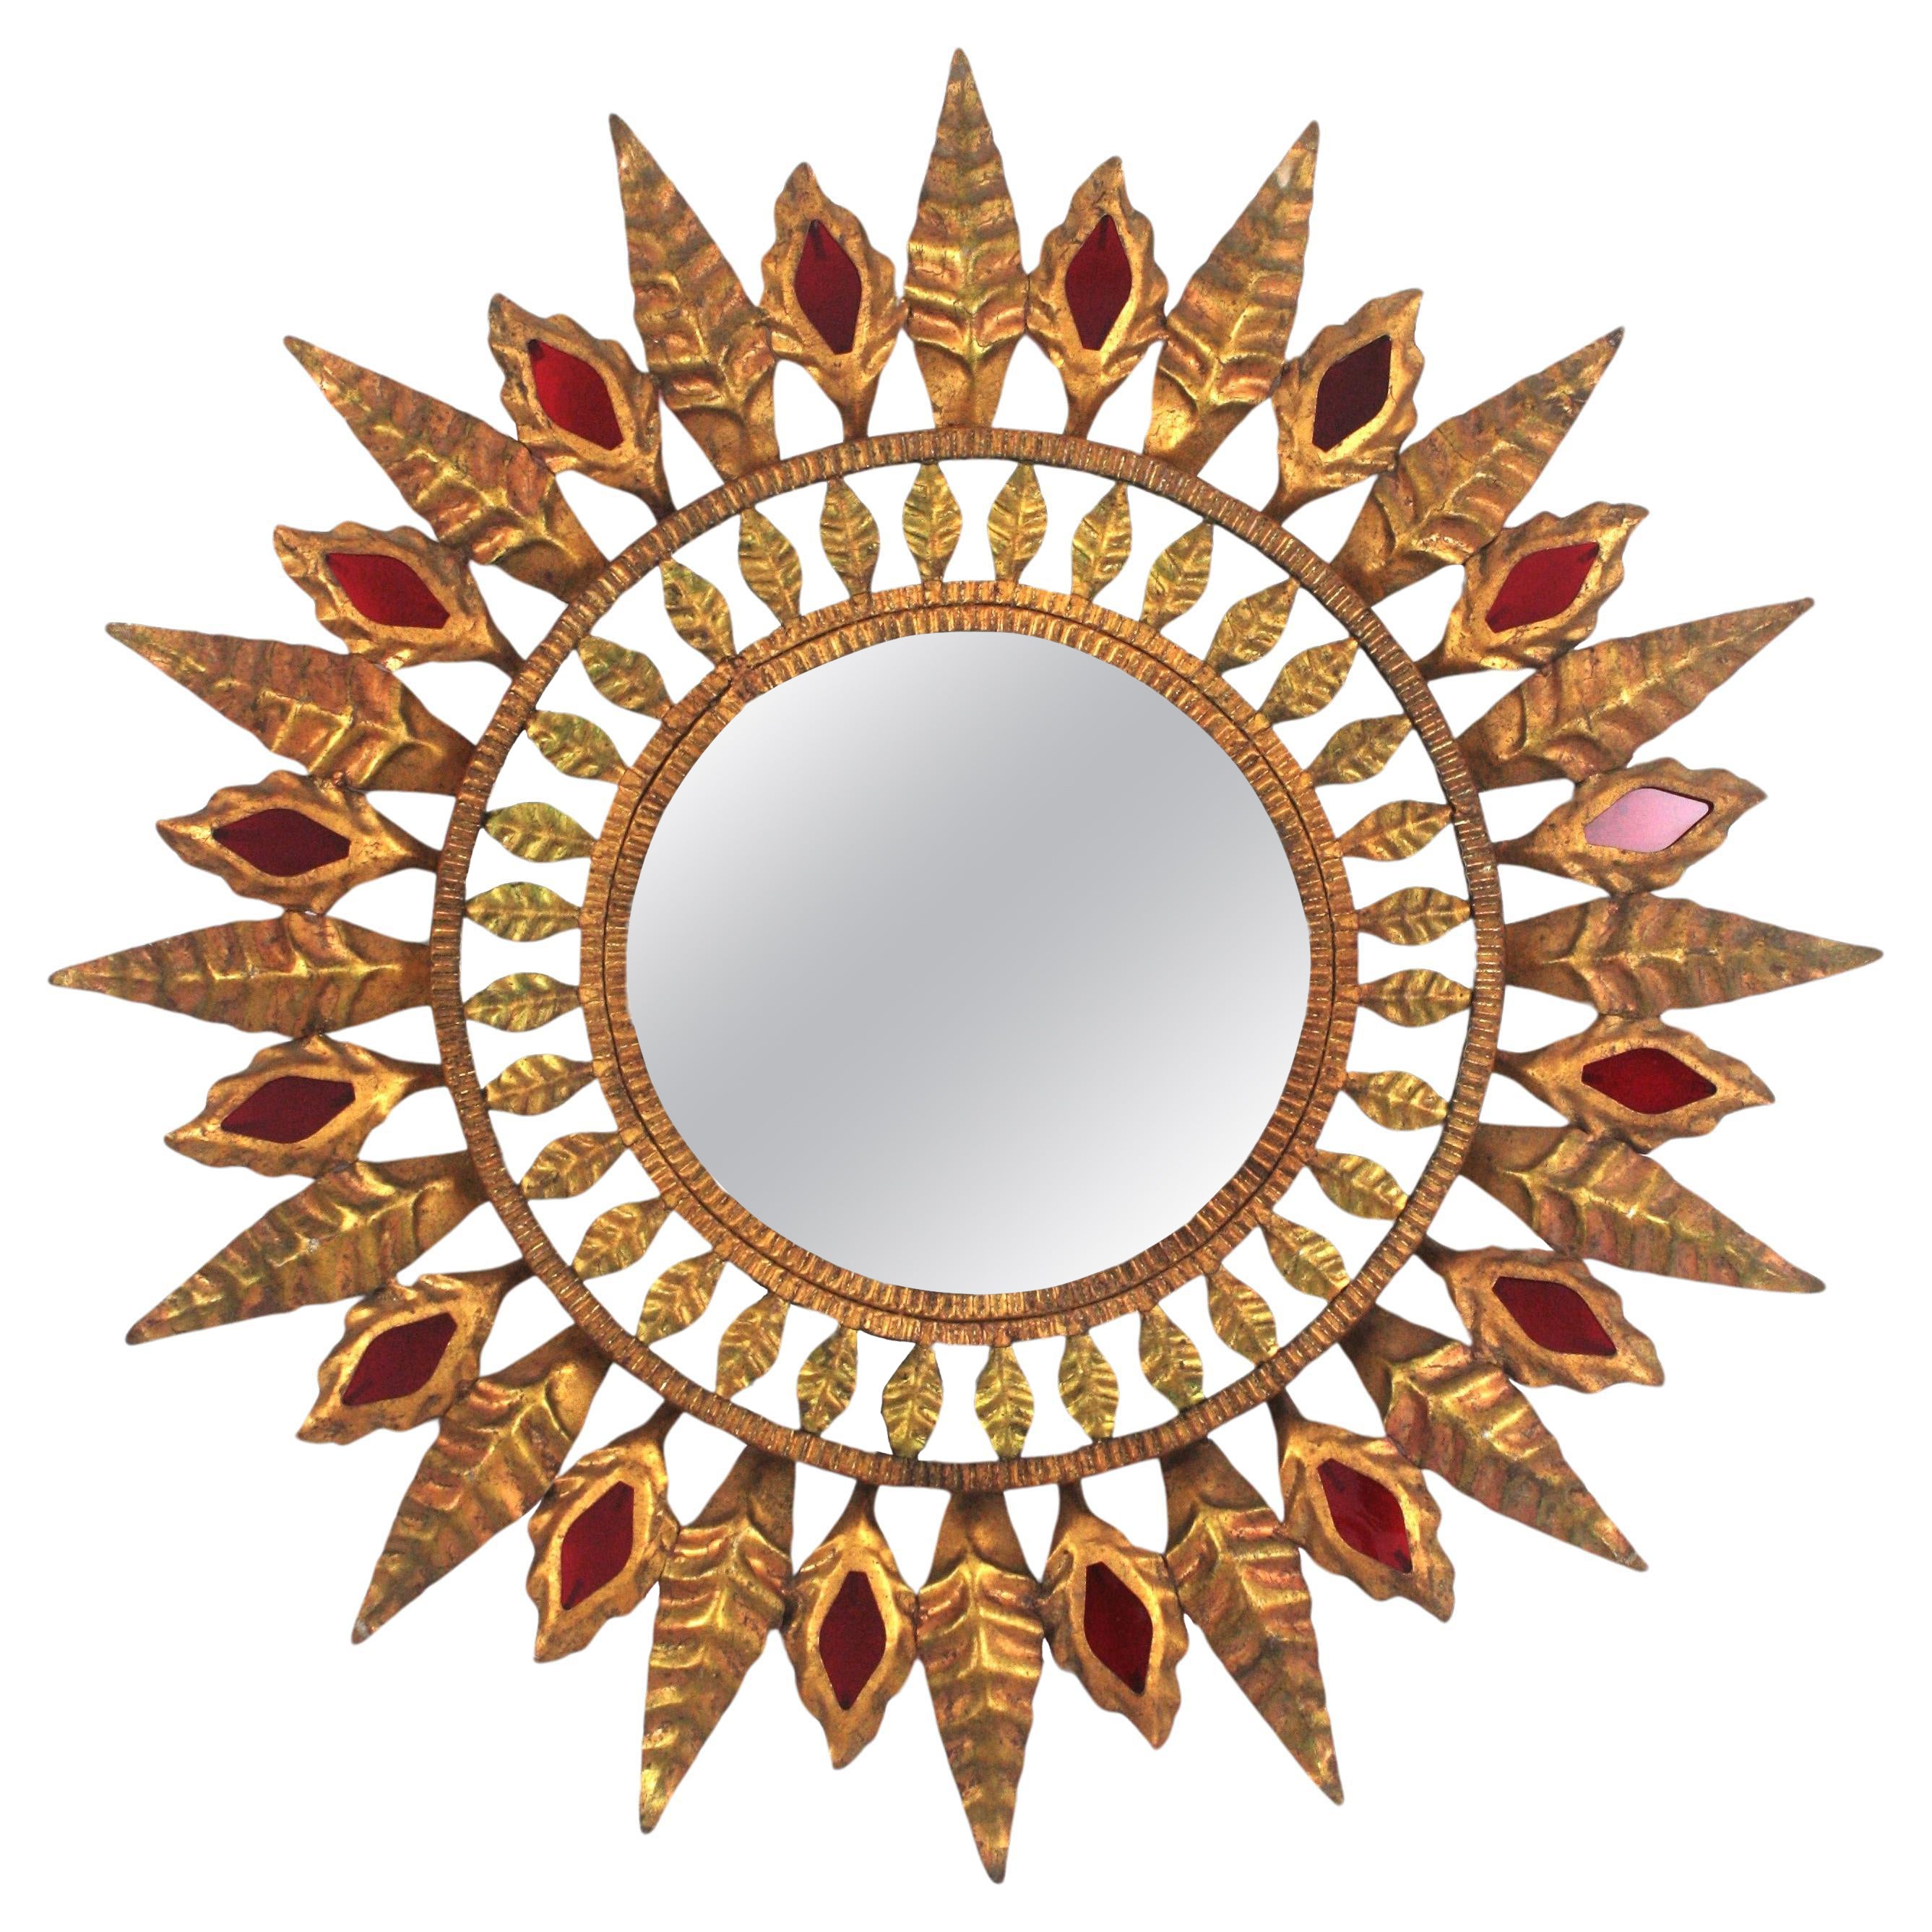 Hollywood Regency Sunburst Mirror in Gilt Metal and Red Glass Detail, 1950s For Sale